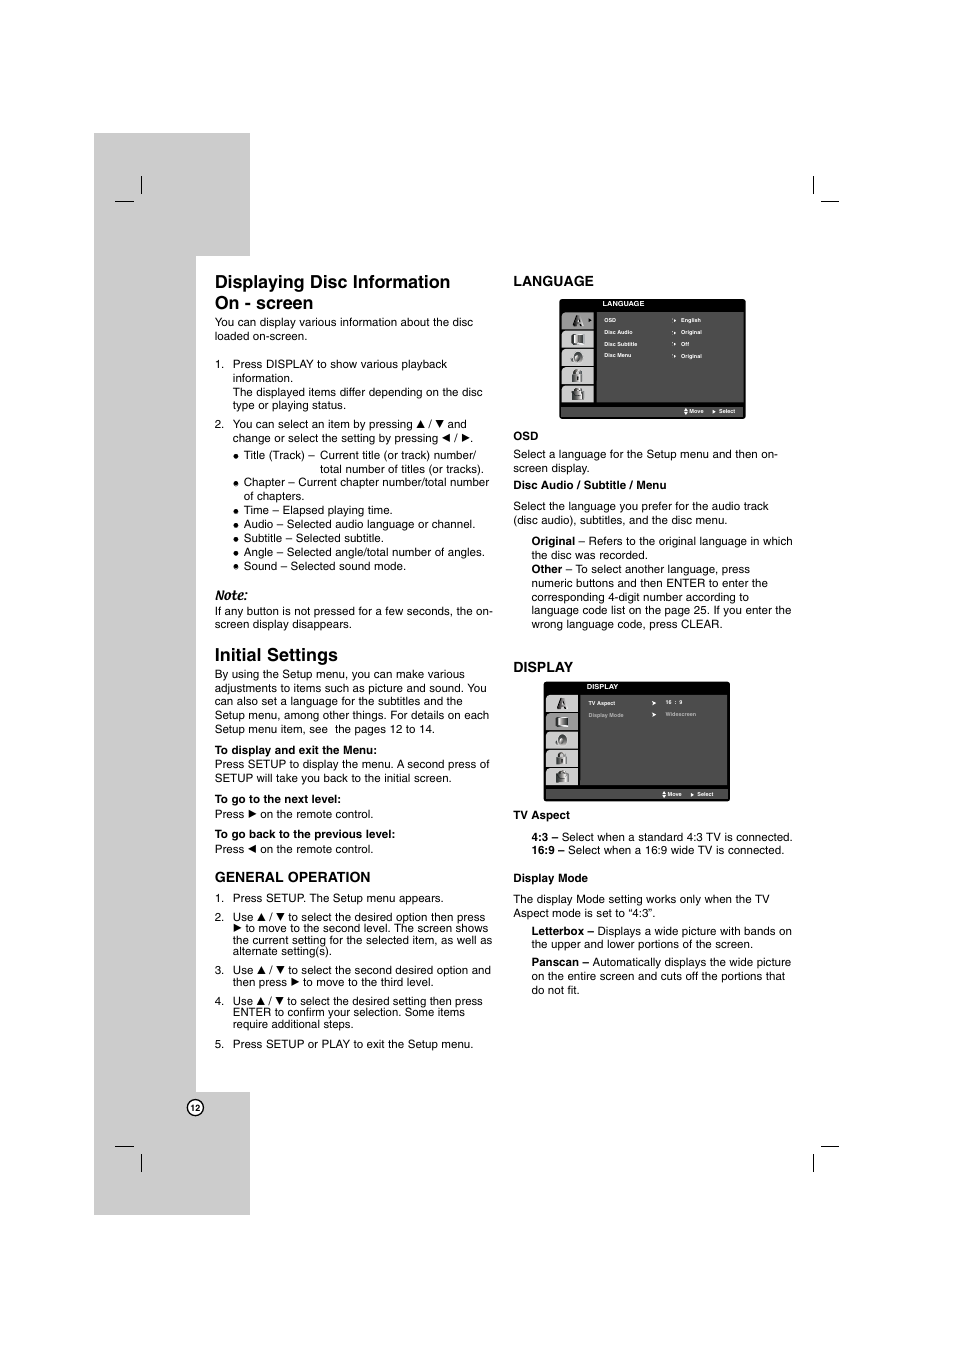 Displaying disc information on - screen, Initial settings, General operation | Language, Display | LG SH72PZ-F User Manual | Page 12 / 28